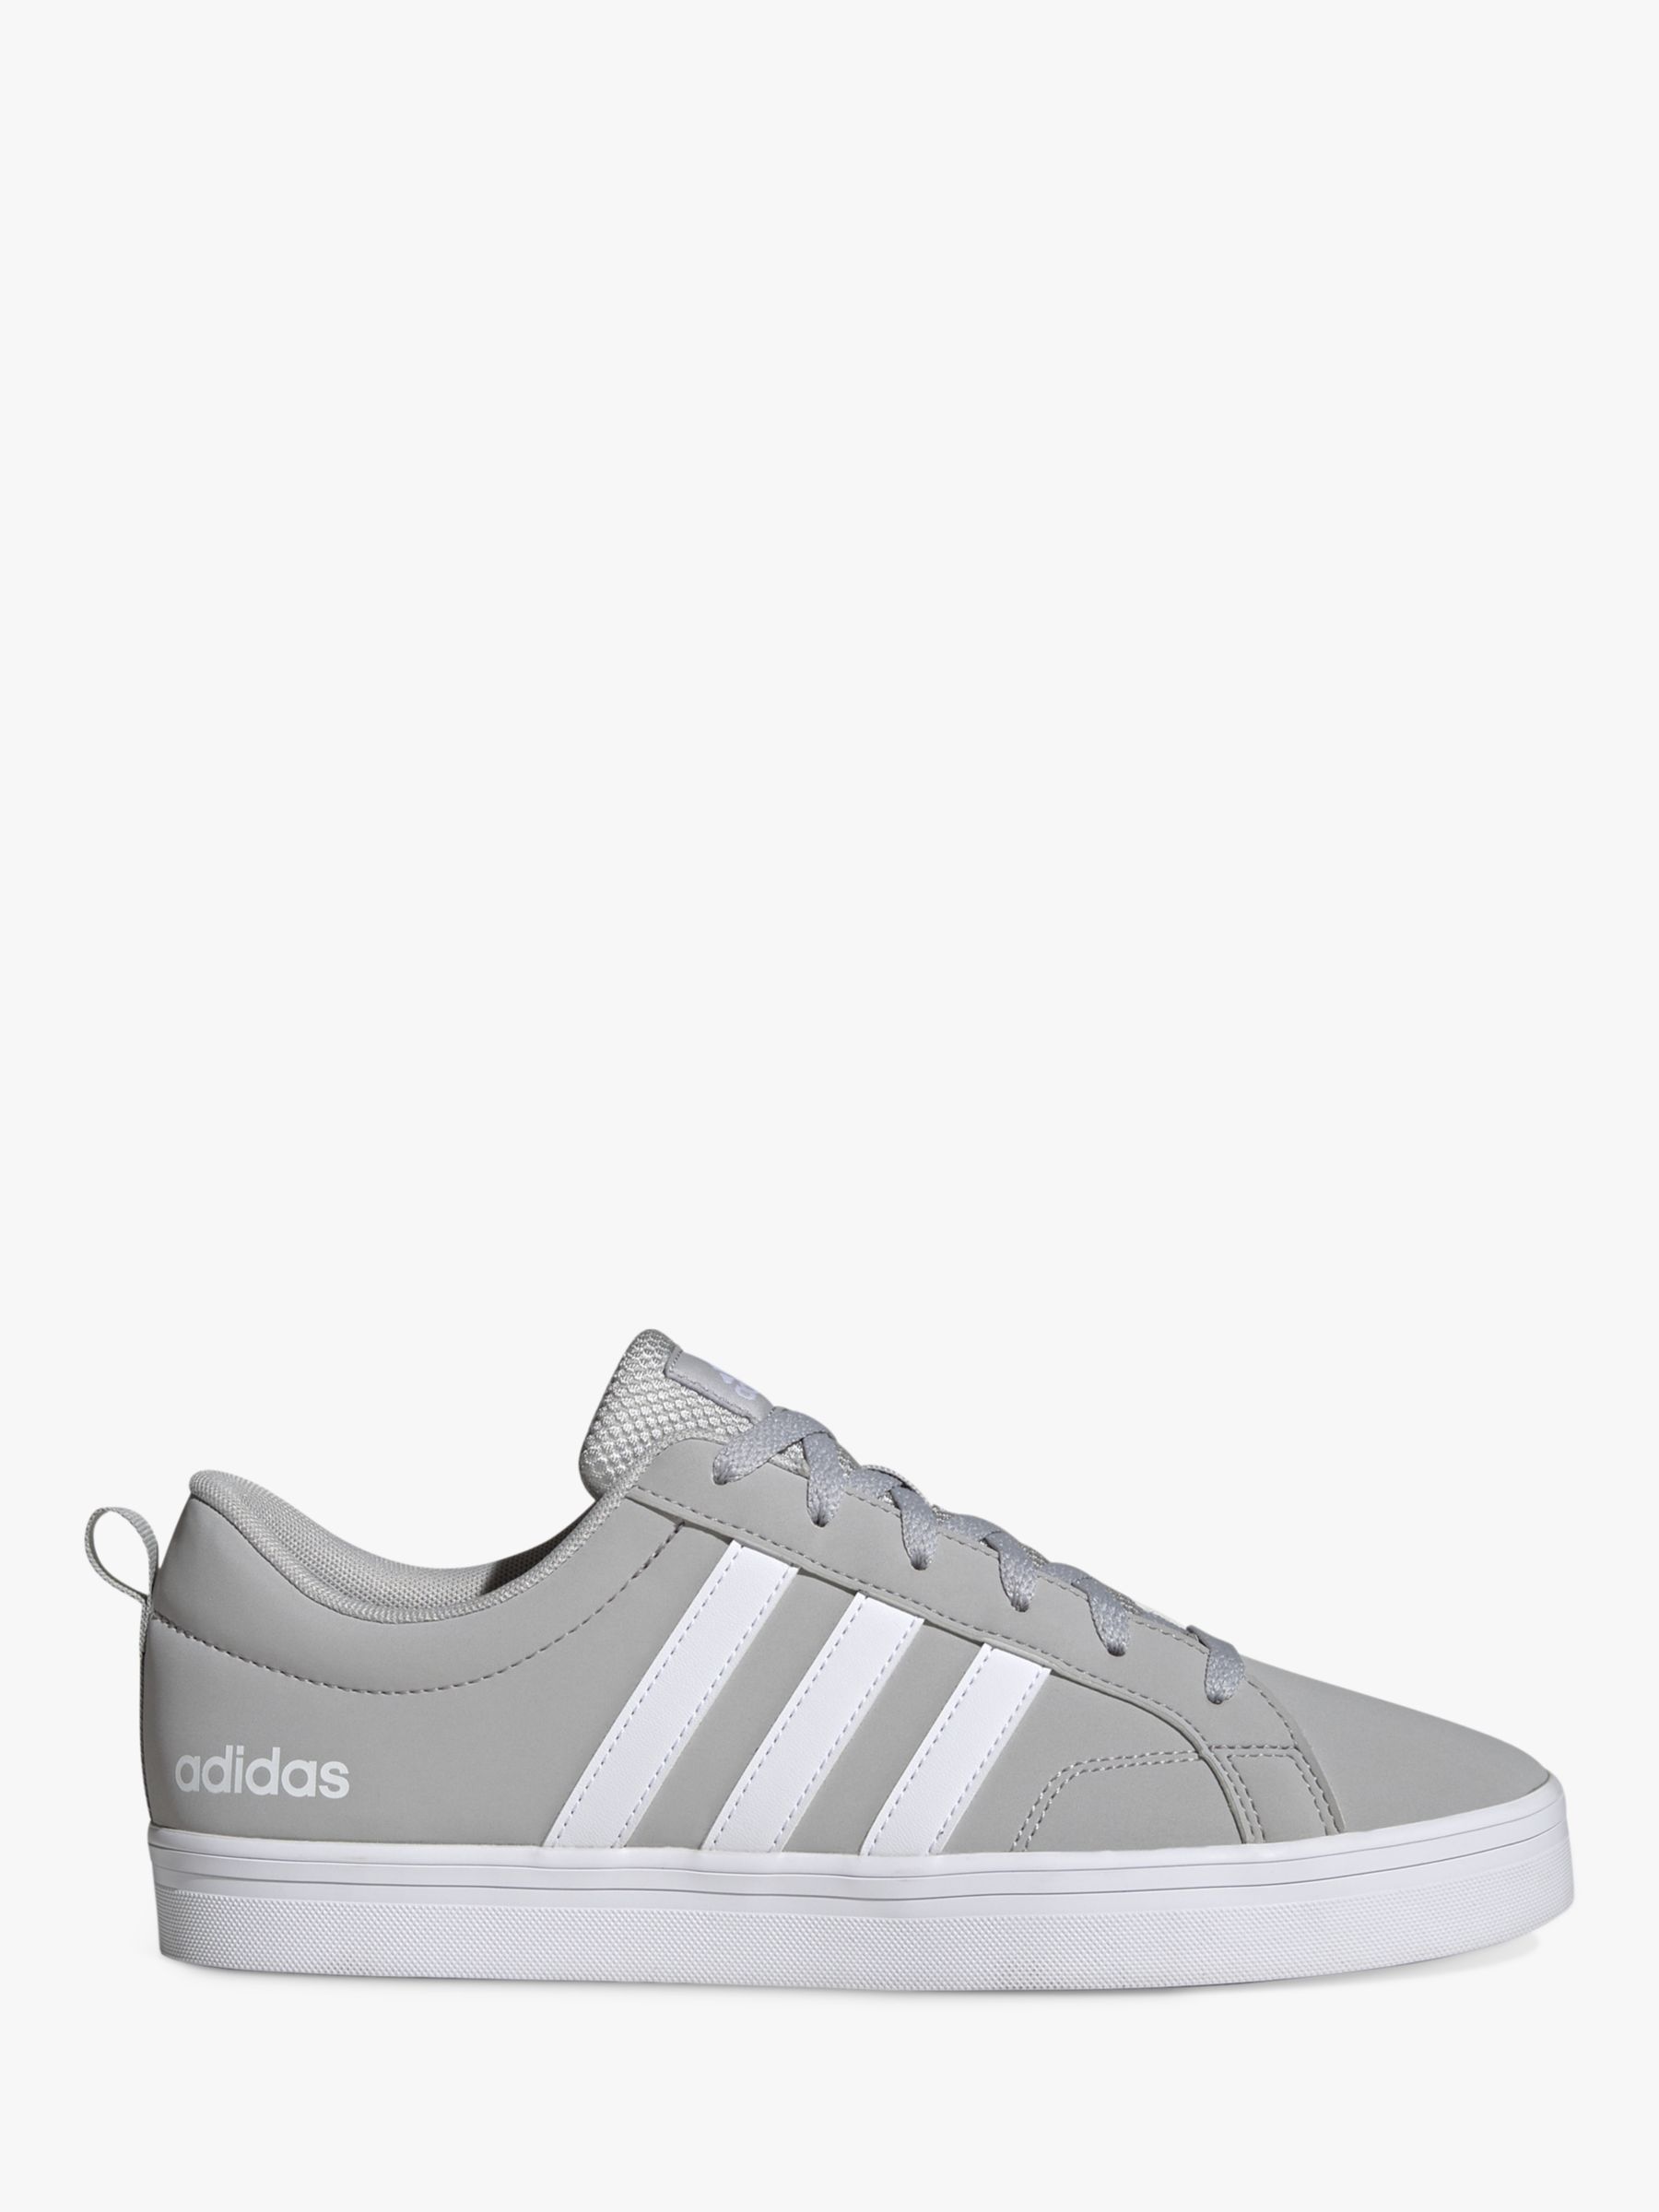 adidas Vs Pace 2.0 Trainers, Grey at John Lewis & Partners